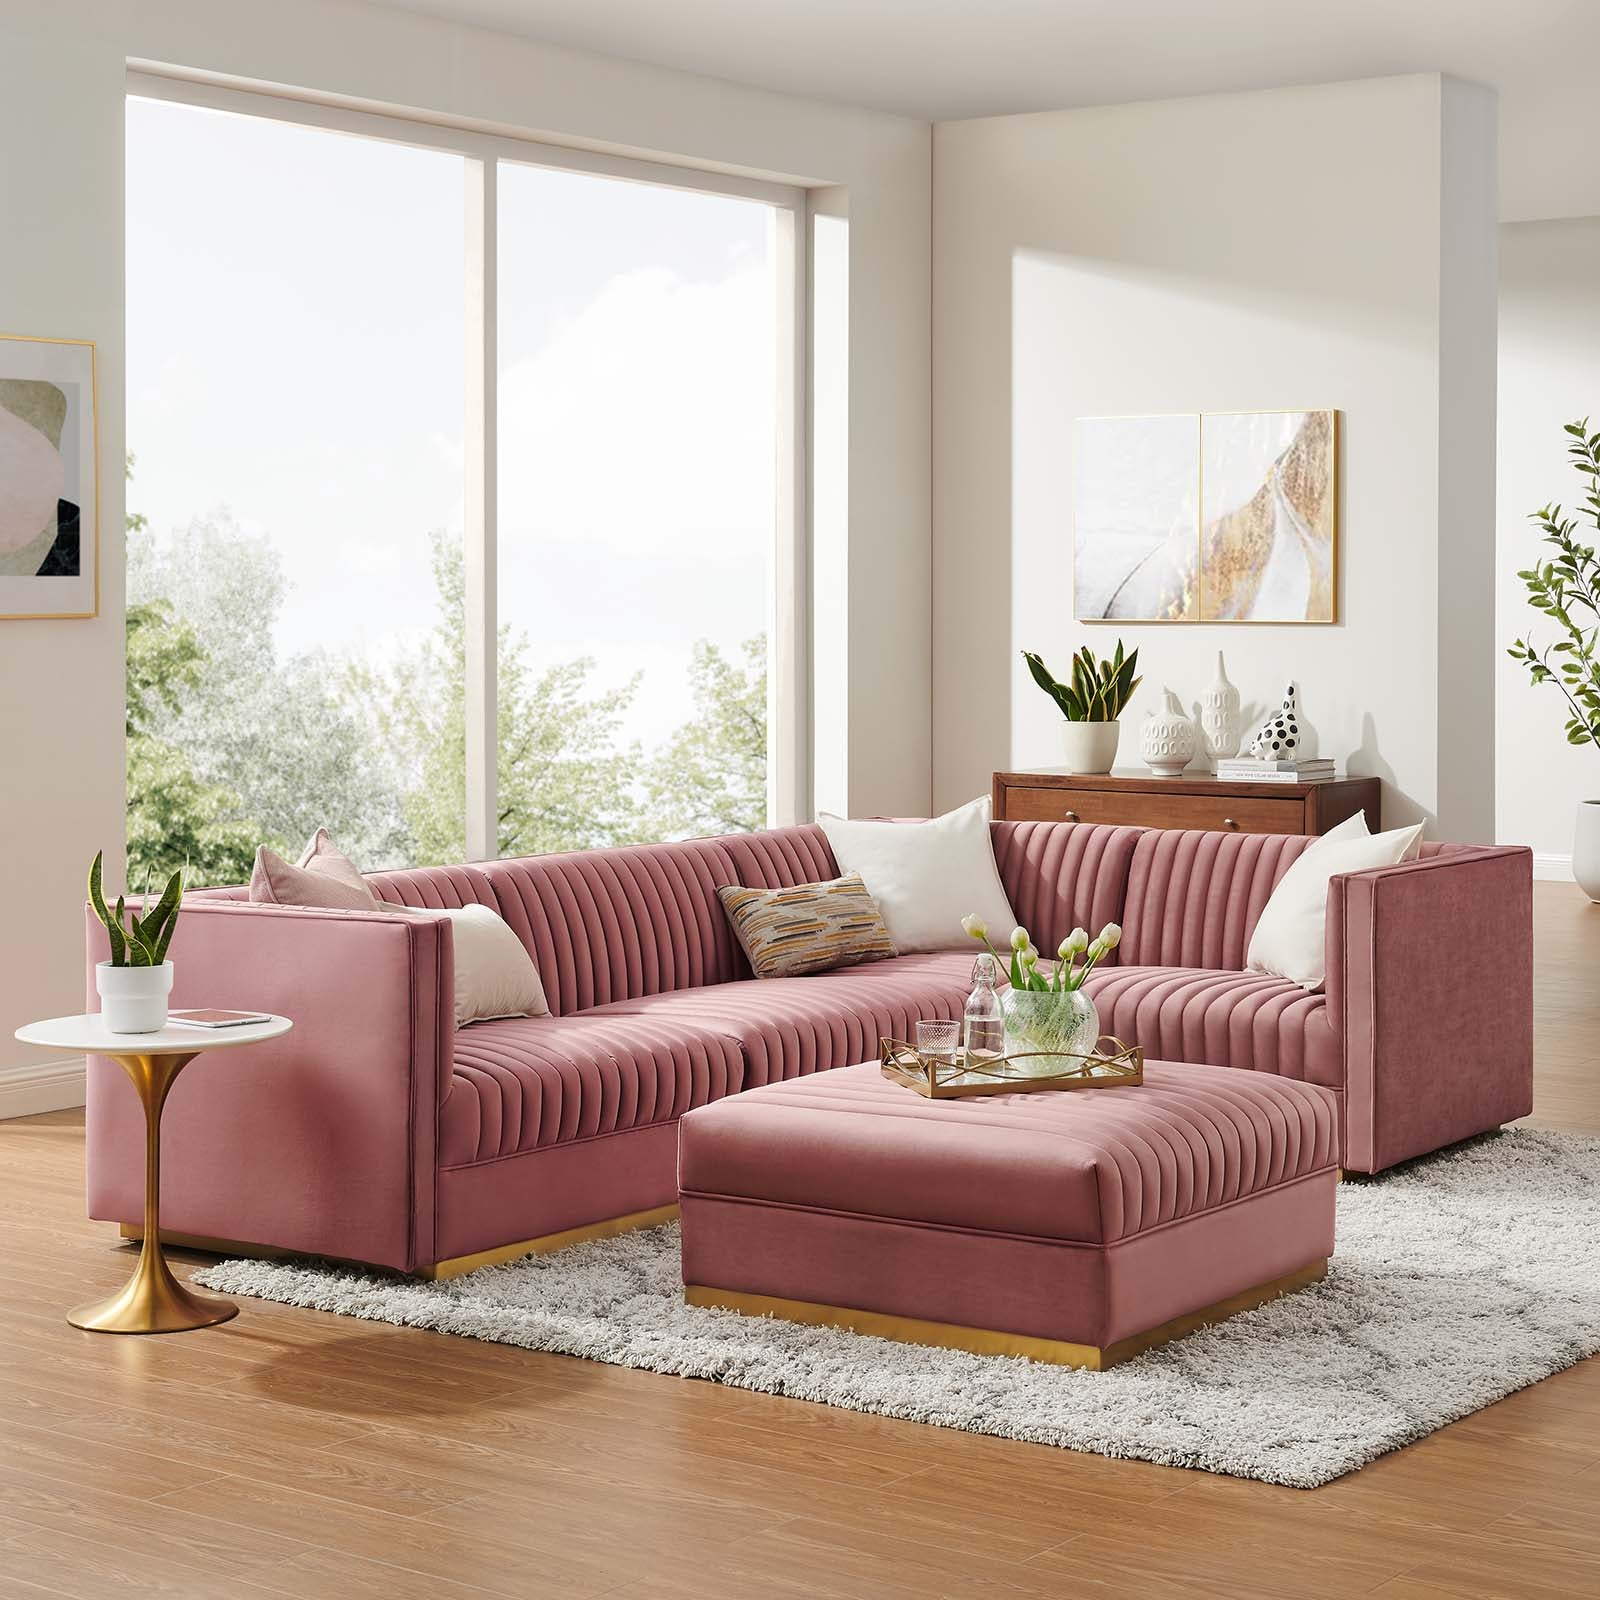 Sanguine Channel Tufted Performance Velvet 5-Piece Right-Facing Modular Sectional Sofa - East Shore Modern Home Furnishings